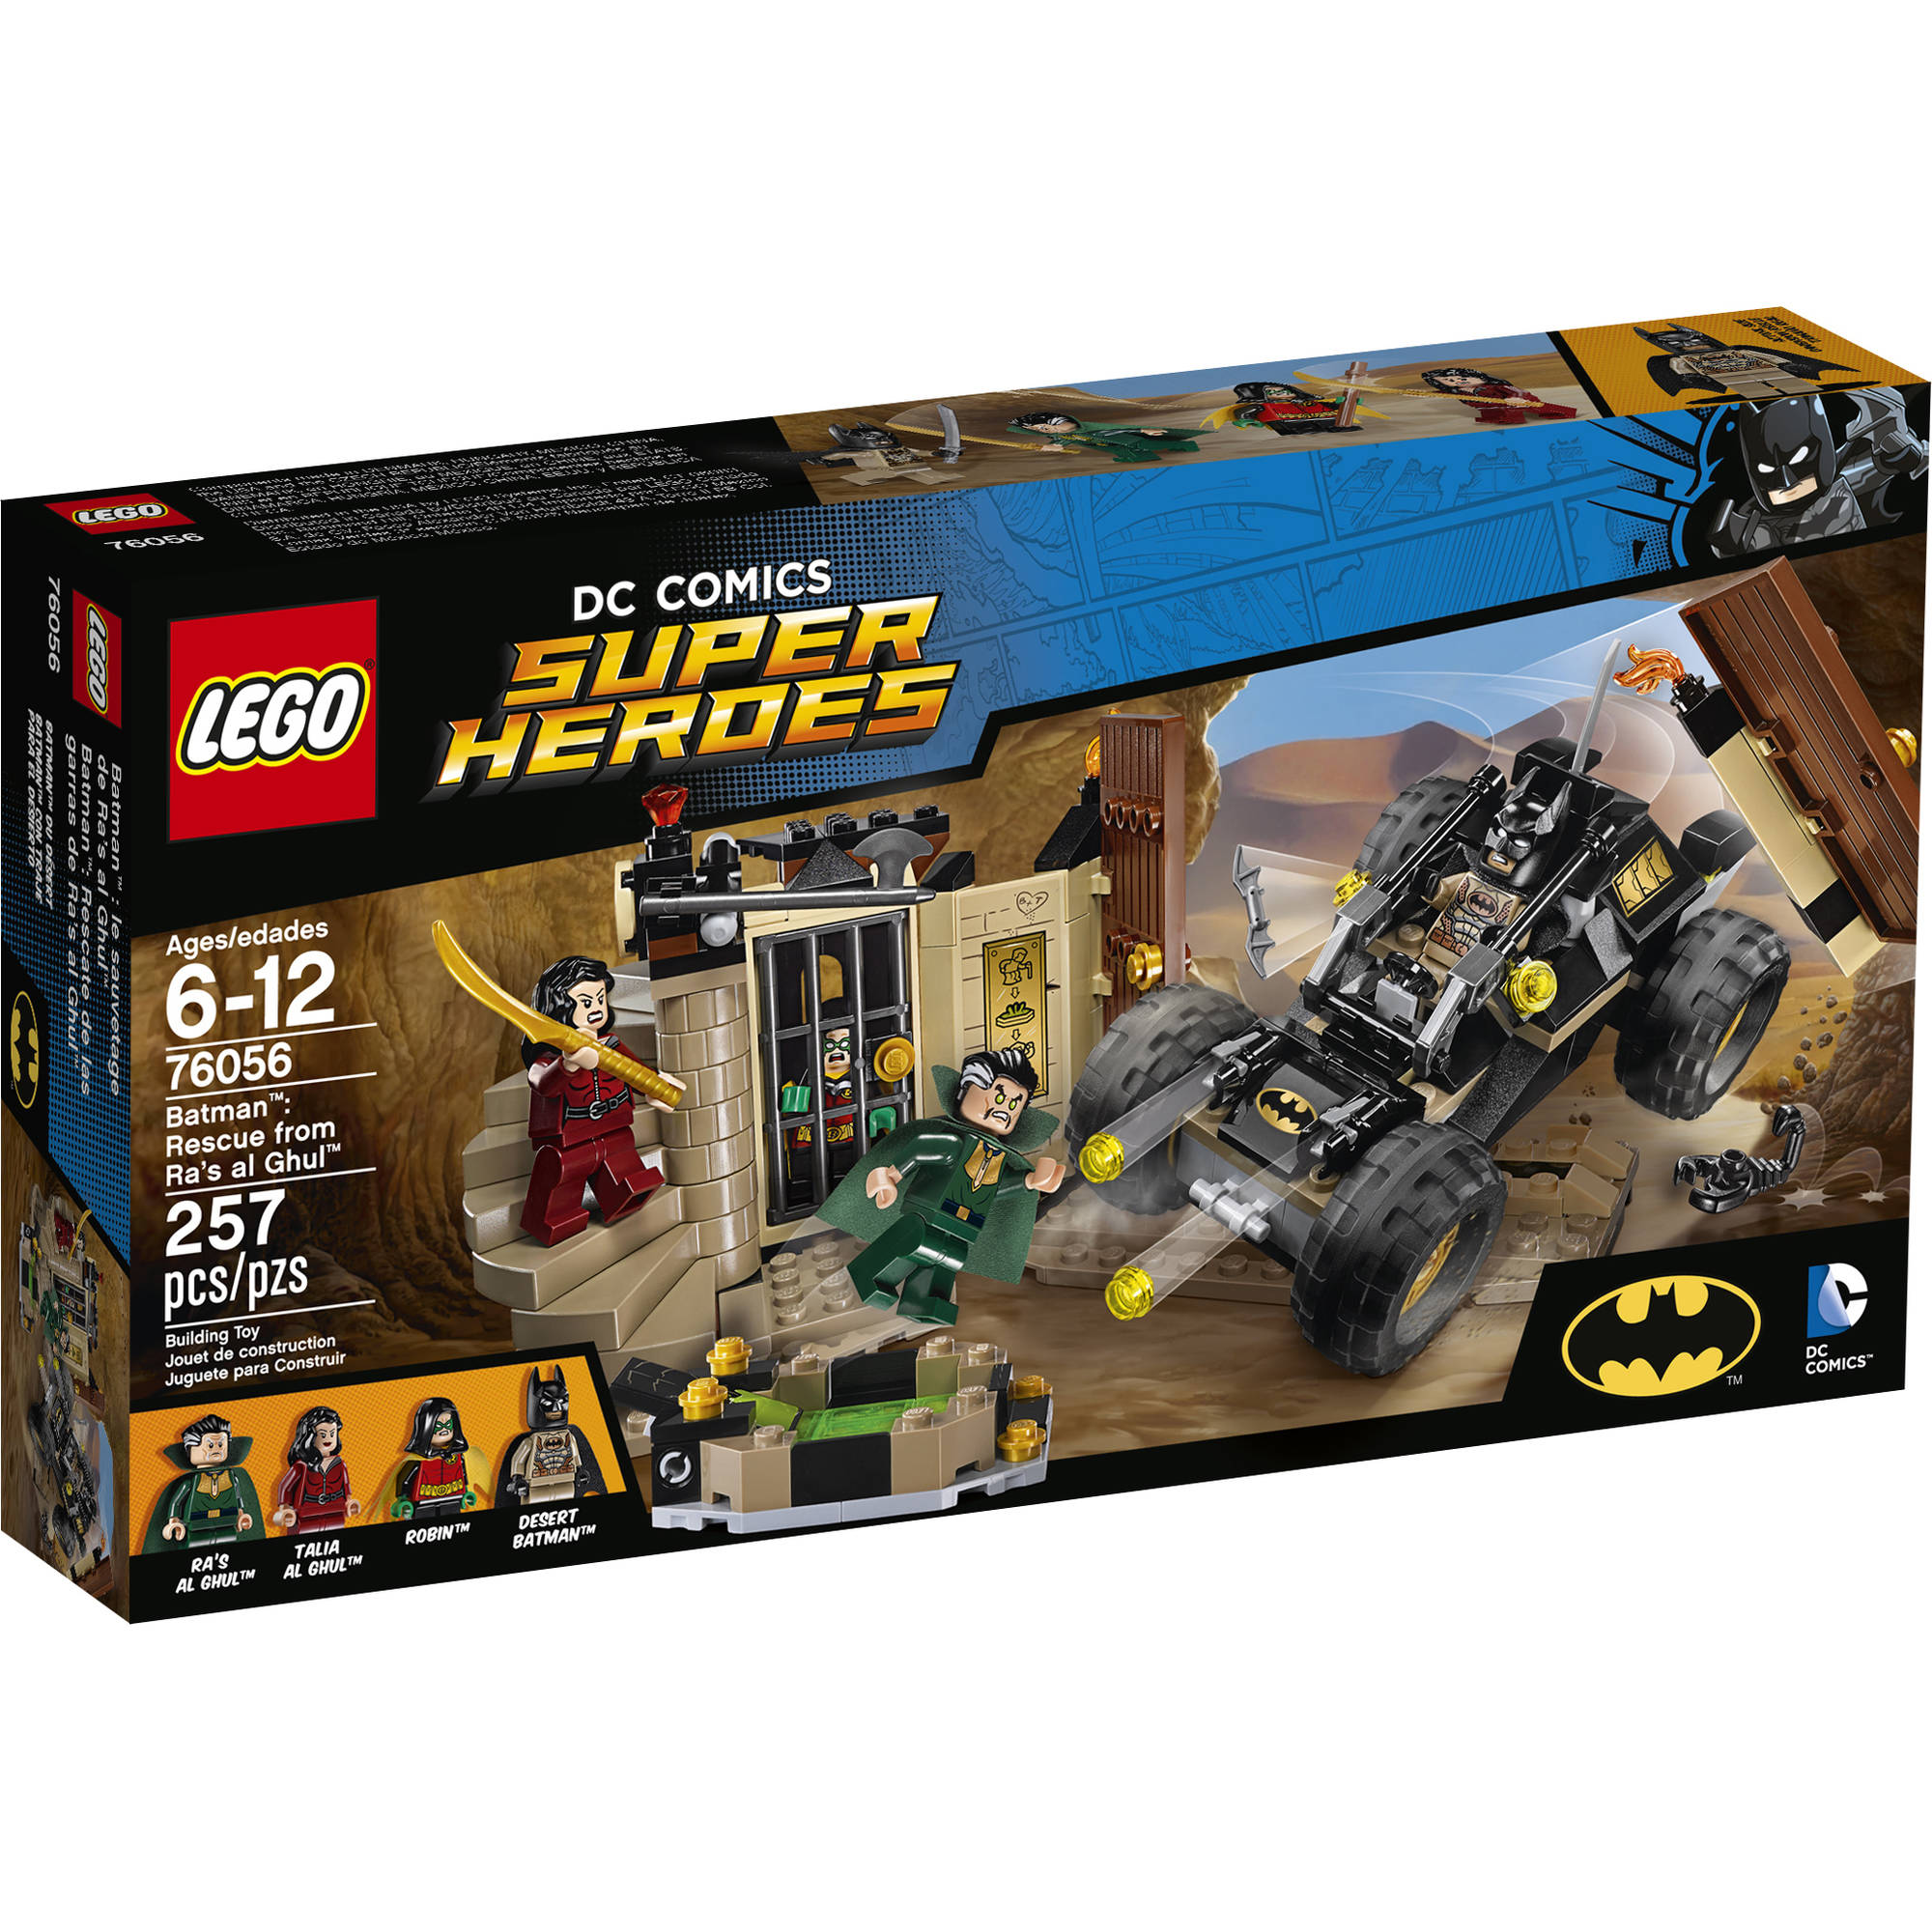 LEGO Super Heroes Batman: Rescue from Ra's al Ghul 76056 - image 1 of 7